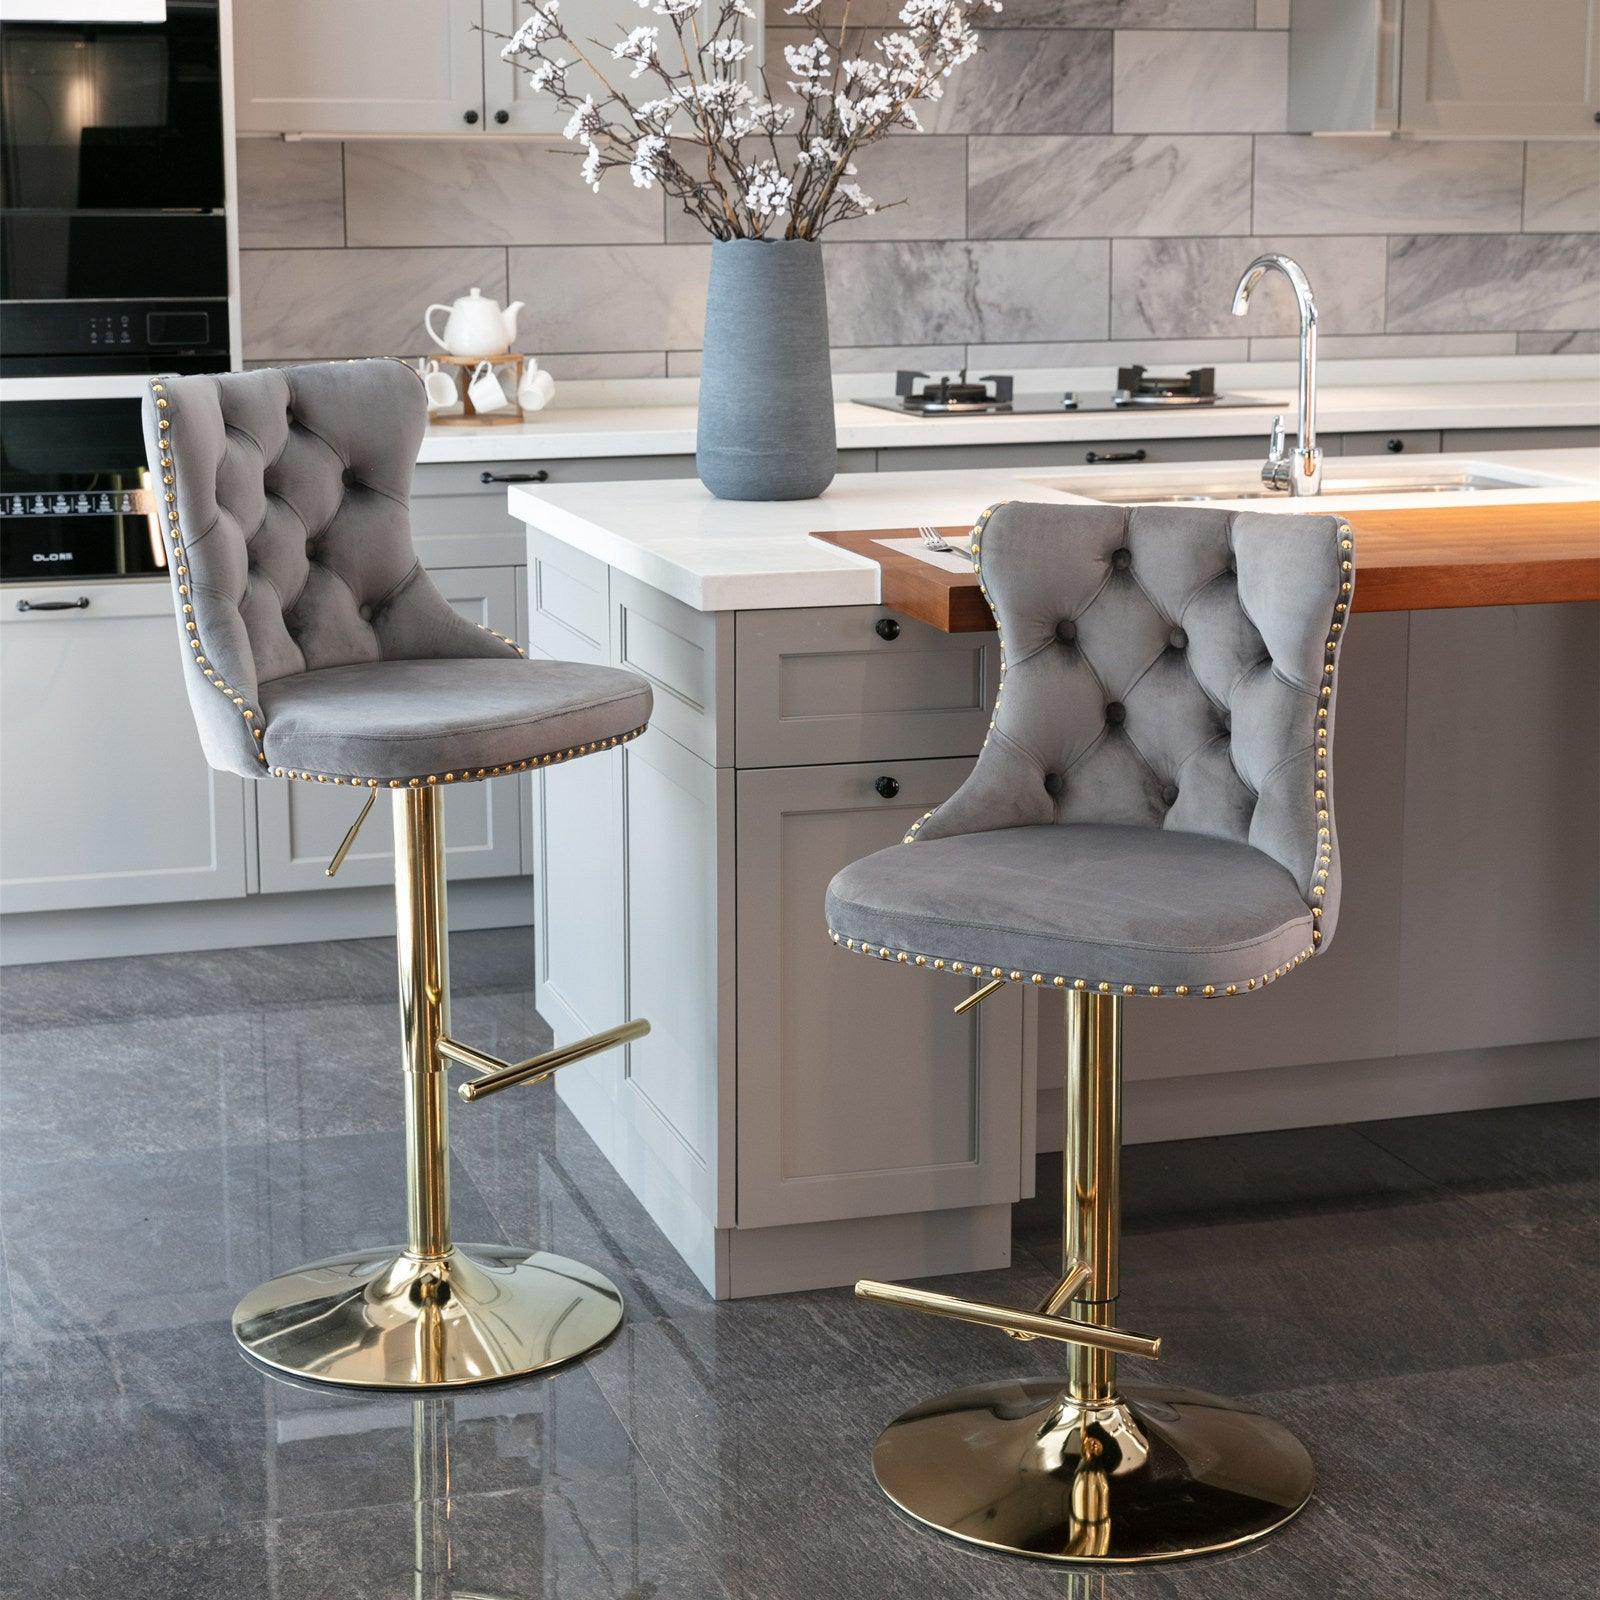 🆓🚛 Golden Swivel Velvet Barstools Adjusatble Seat Height From 25-33 Inch, Modern Upholstered Bar Stools With Backs Comfortable Tufted for Home Pub & Kitchen Island, Gray, Set Of 2）